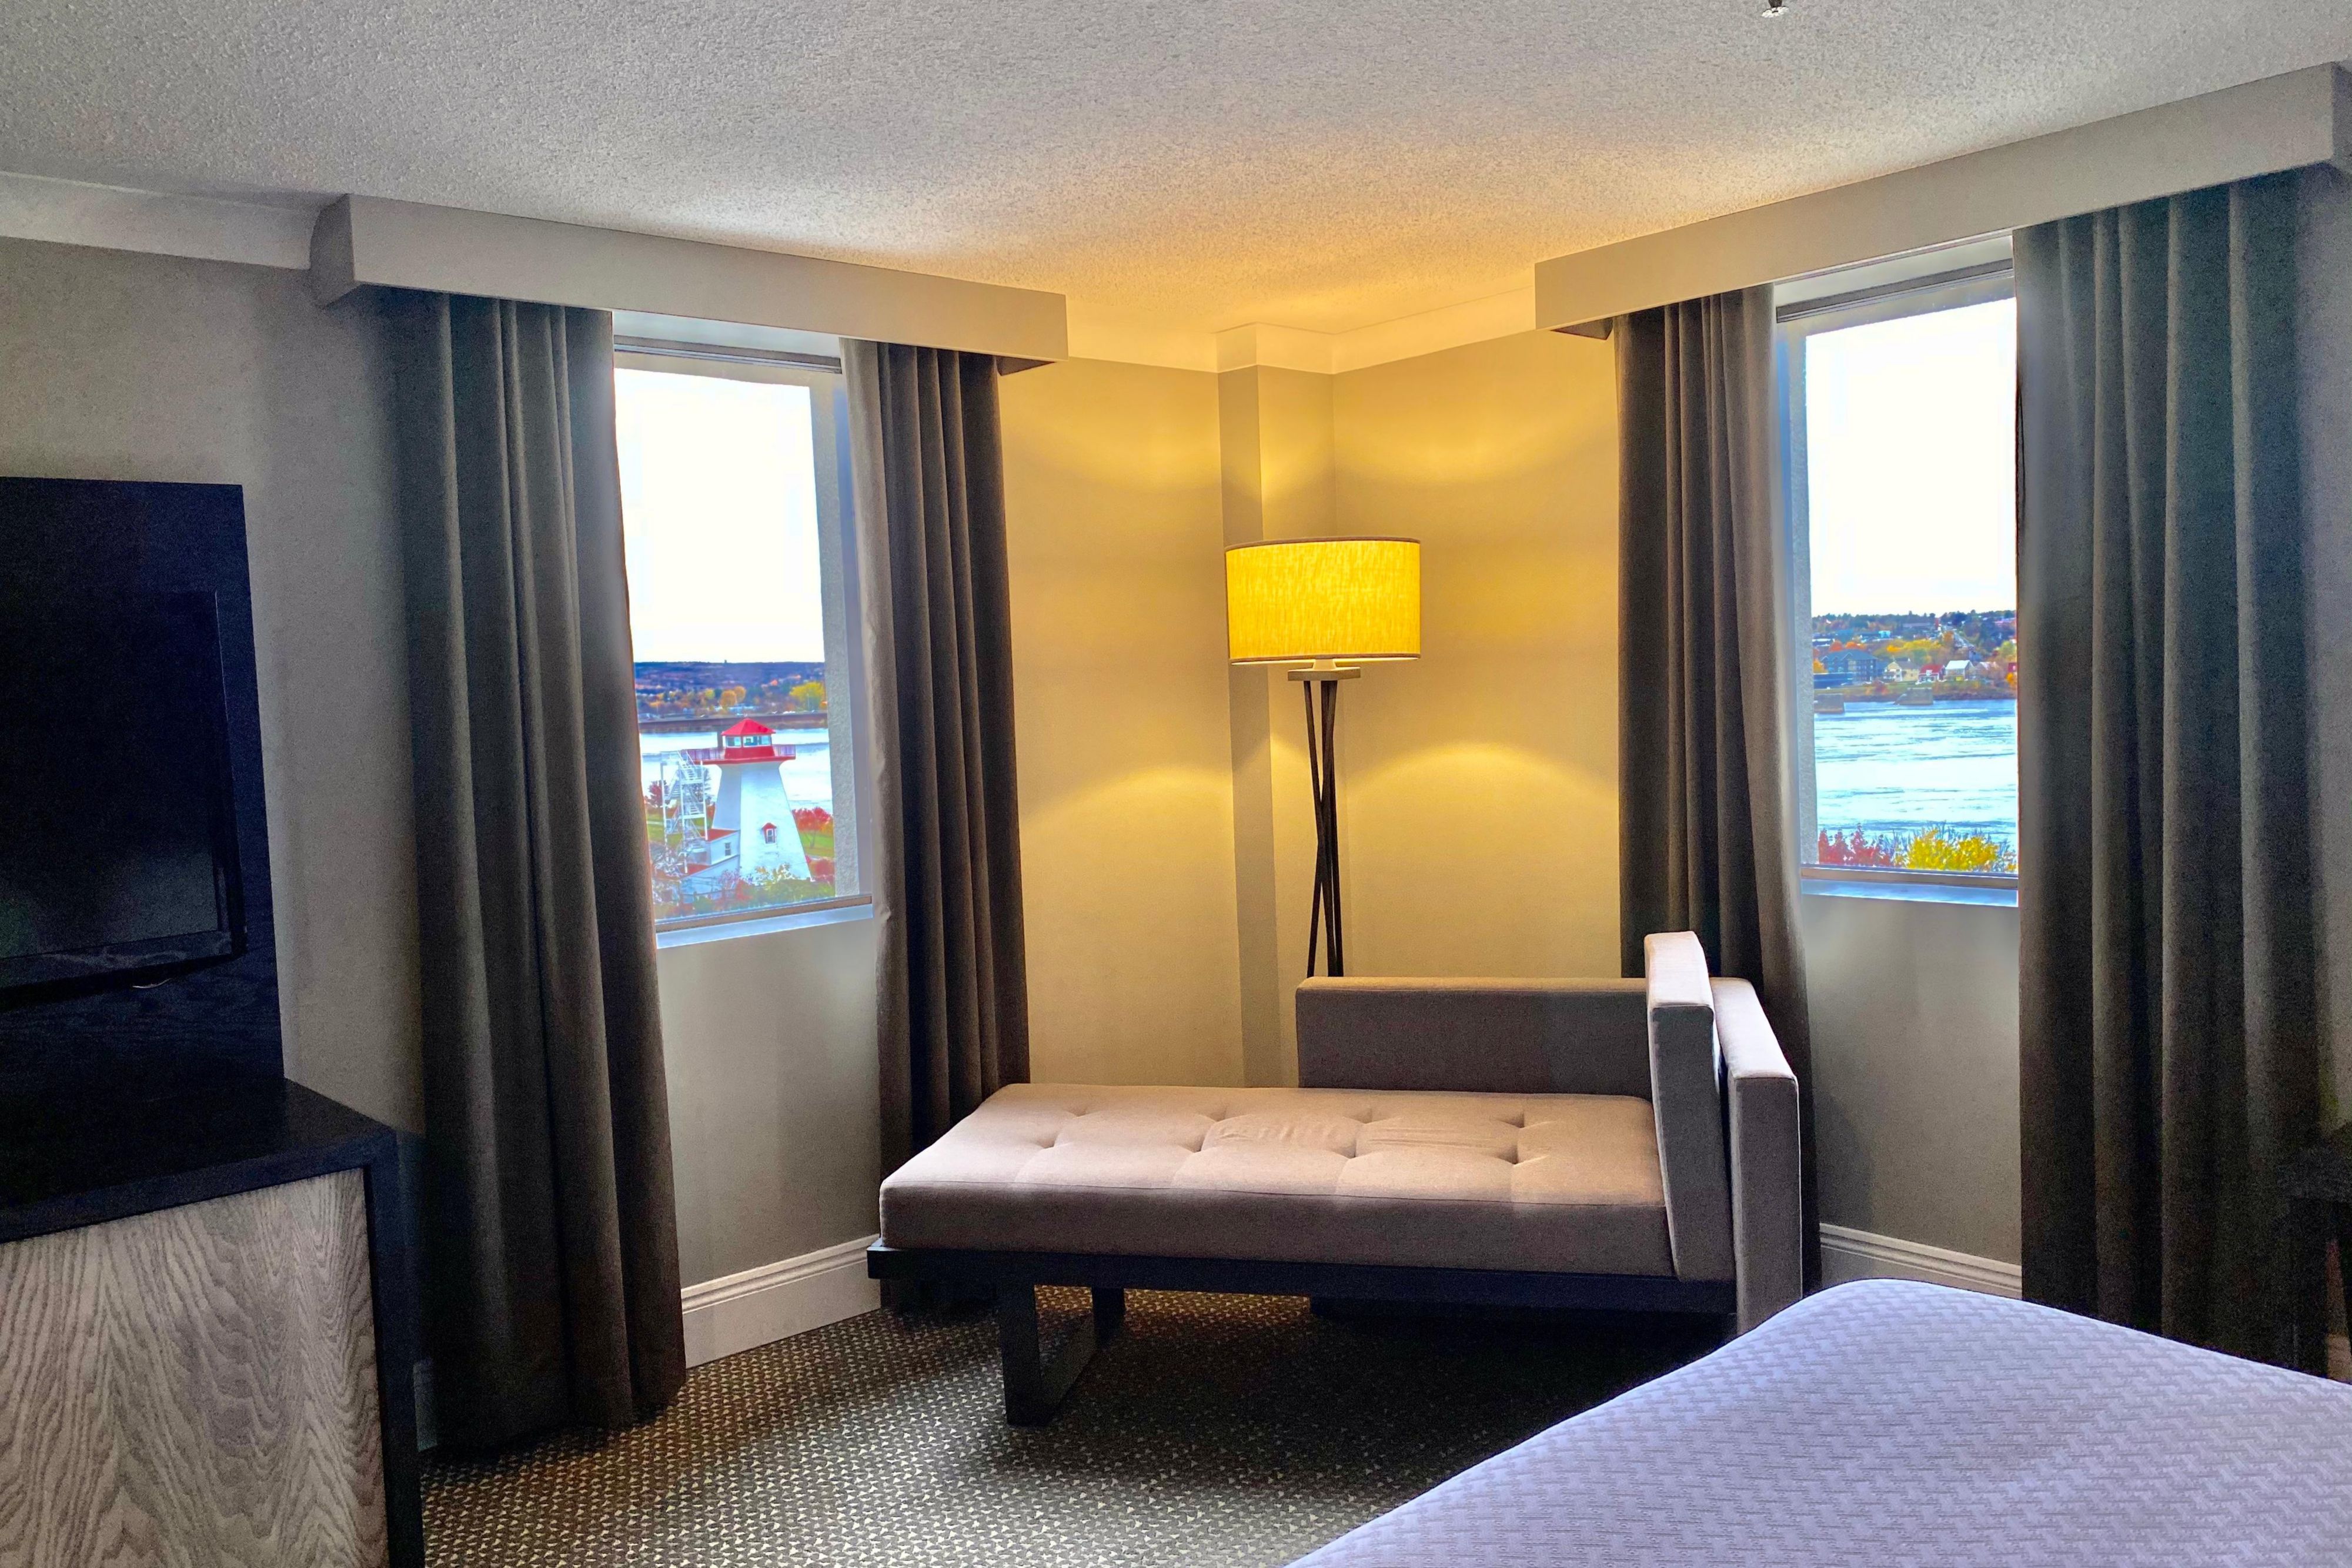 Our spacious guest rooms offer expansive views of St. John&#39;s River